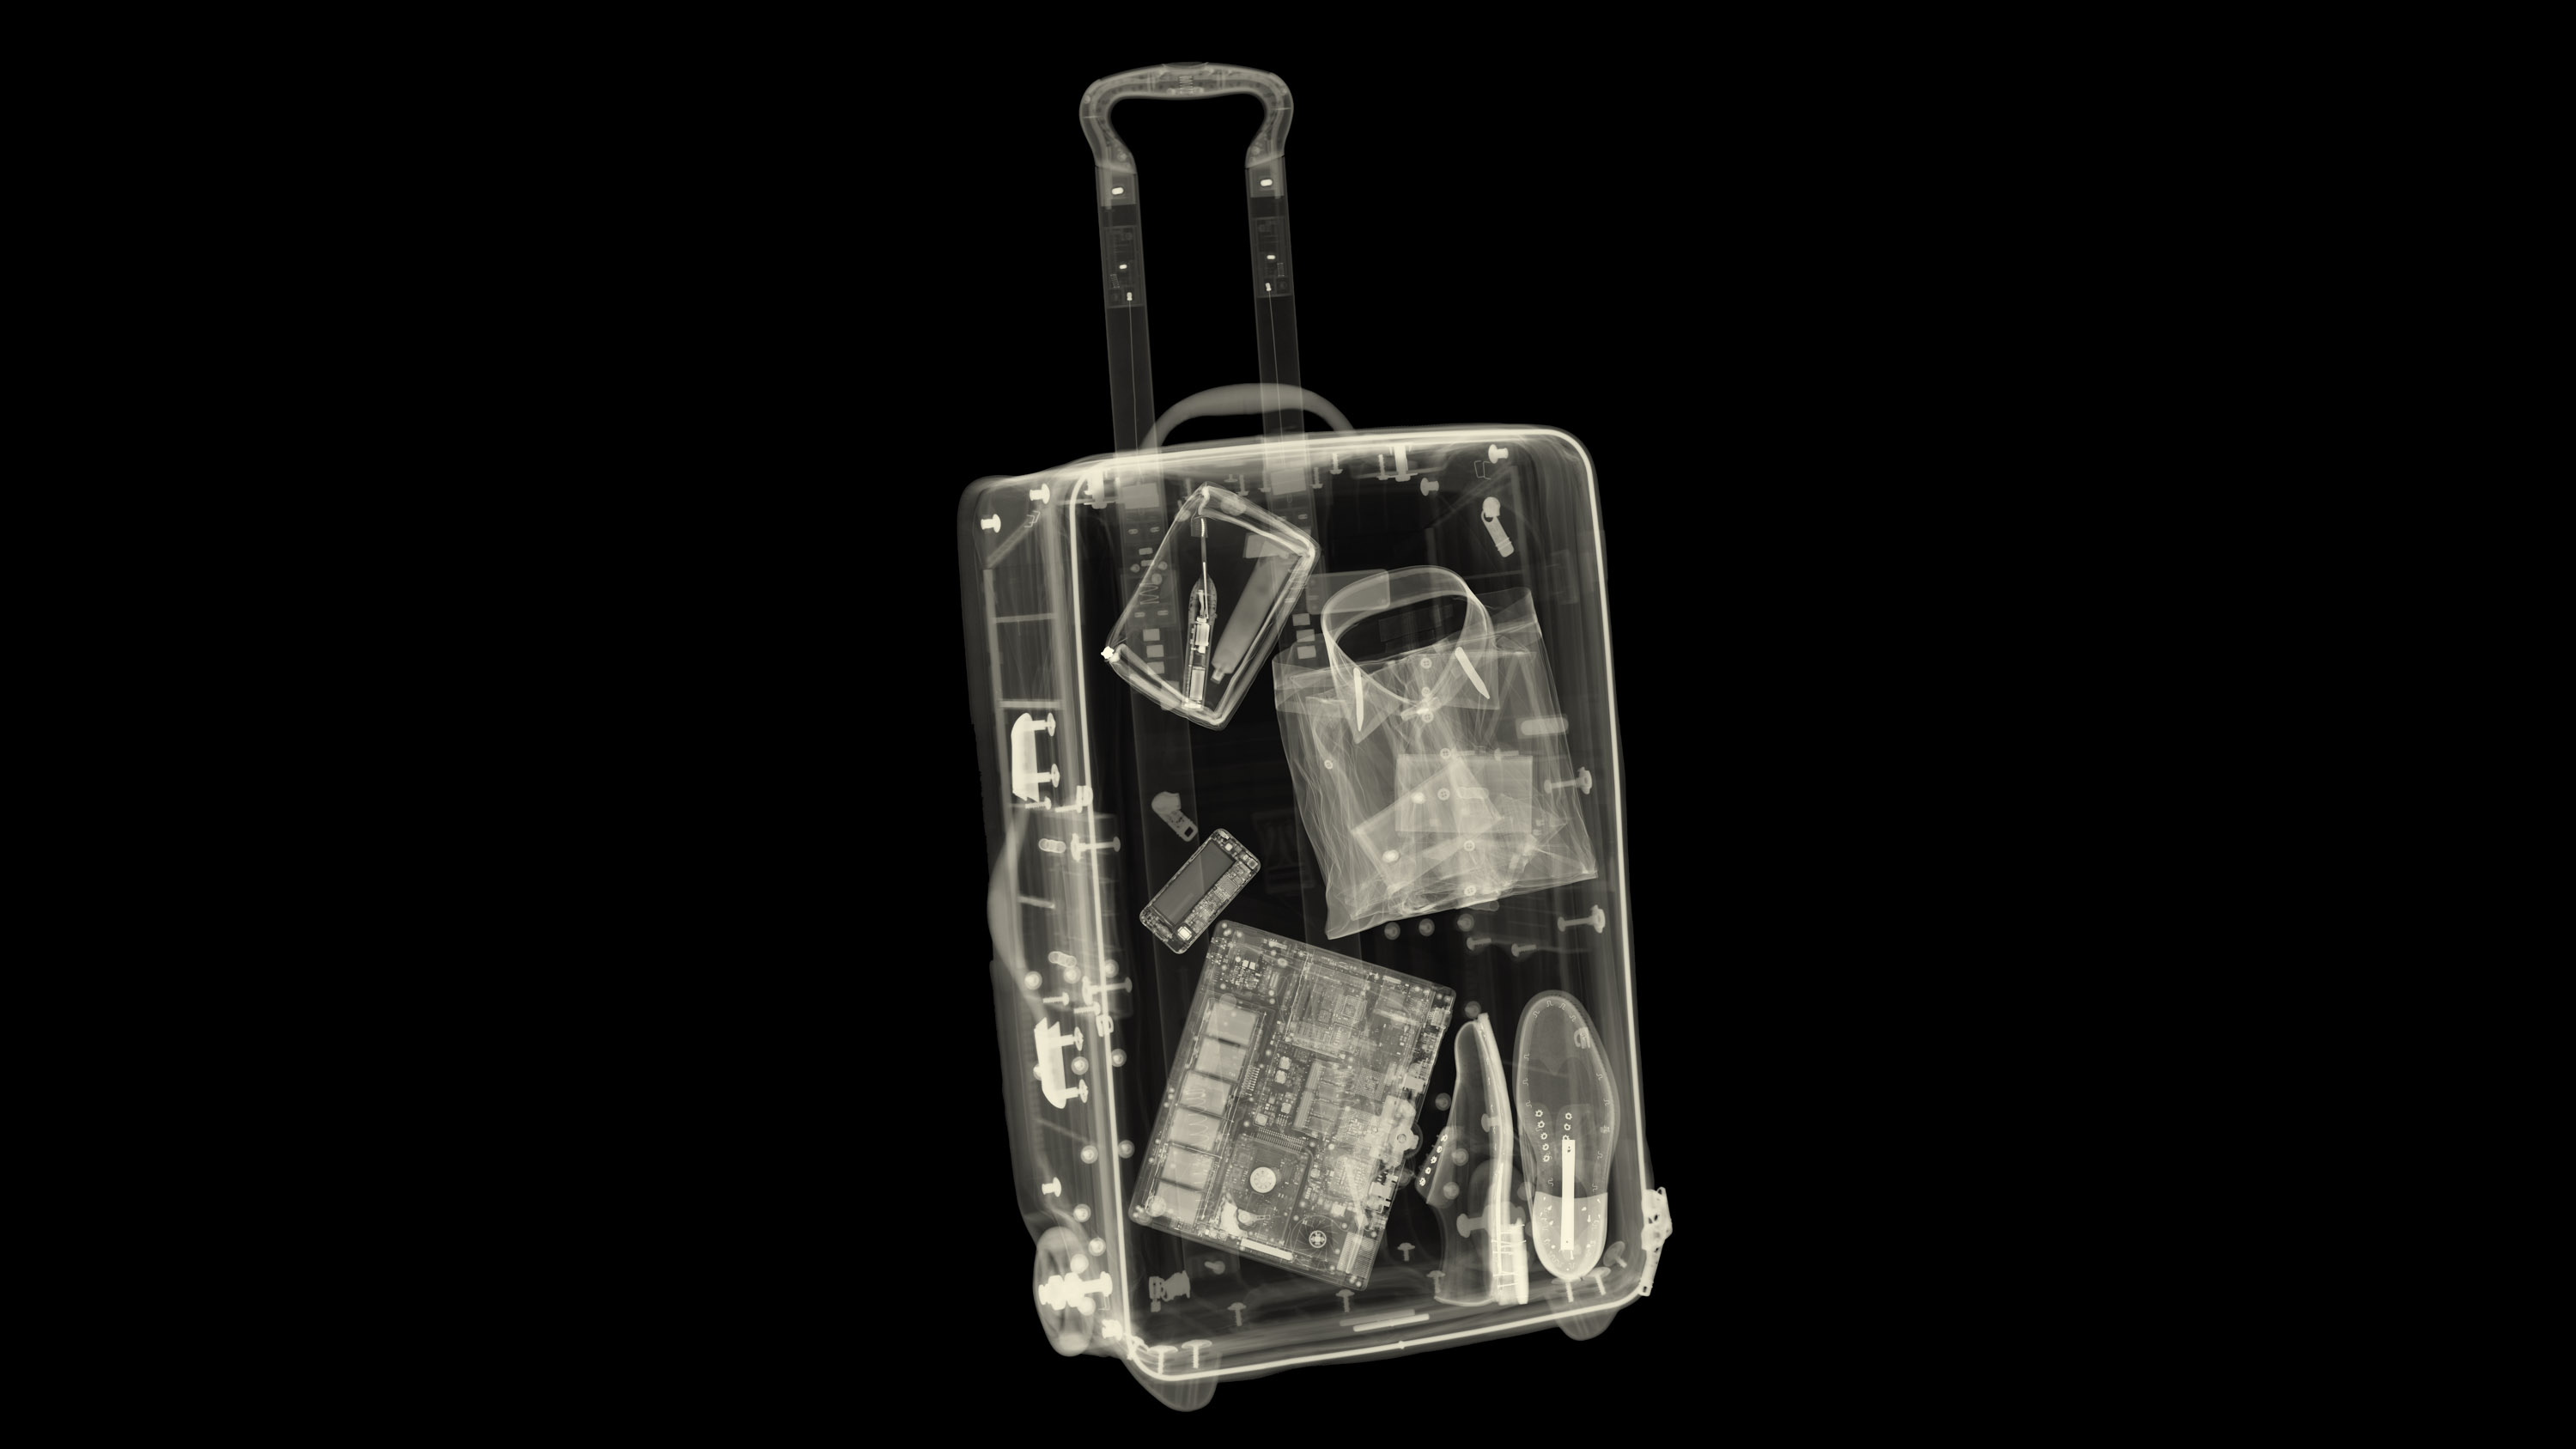 x-ray scan of rolling suitcase